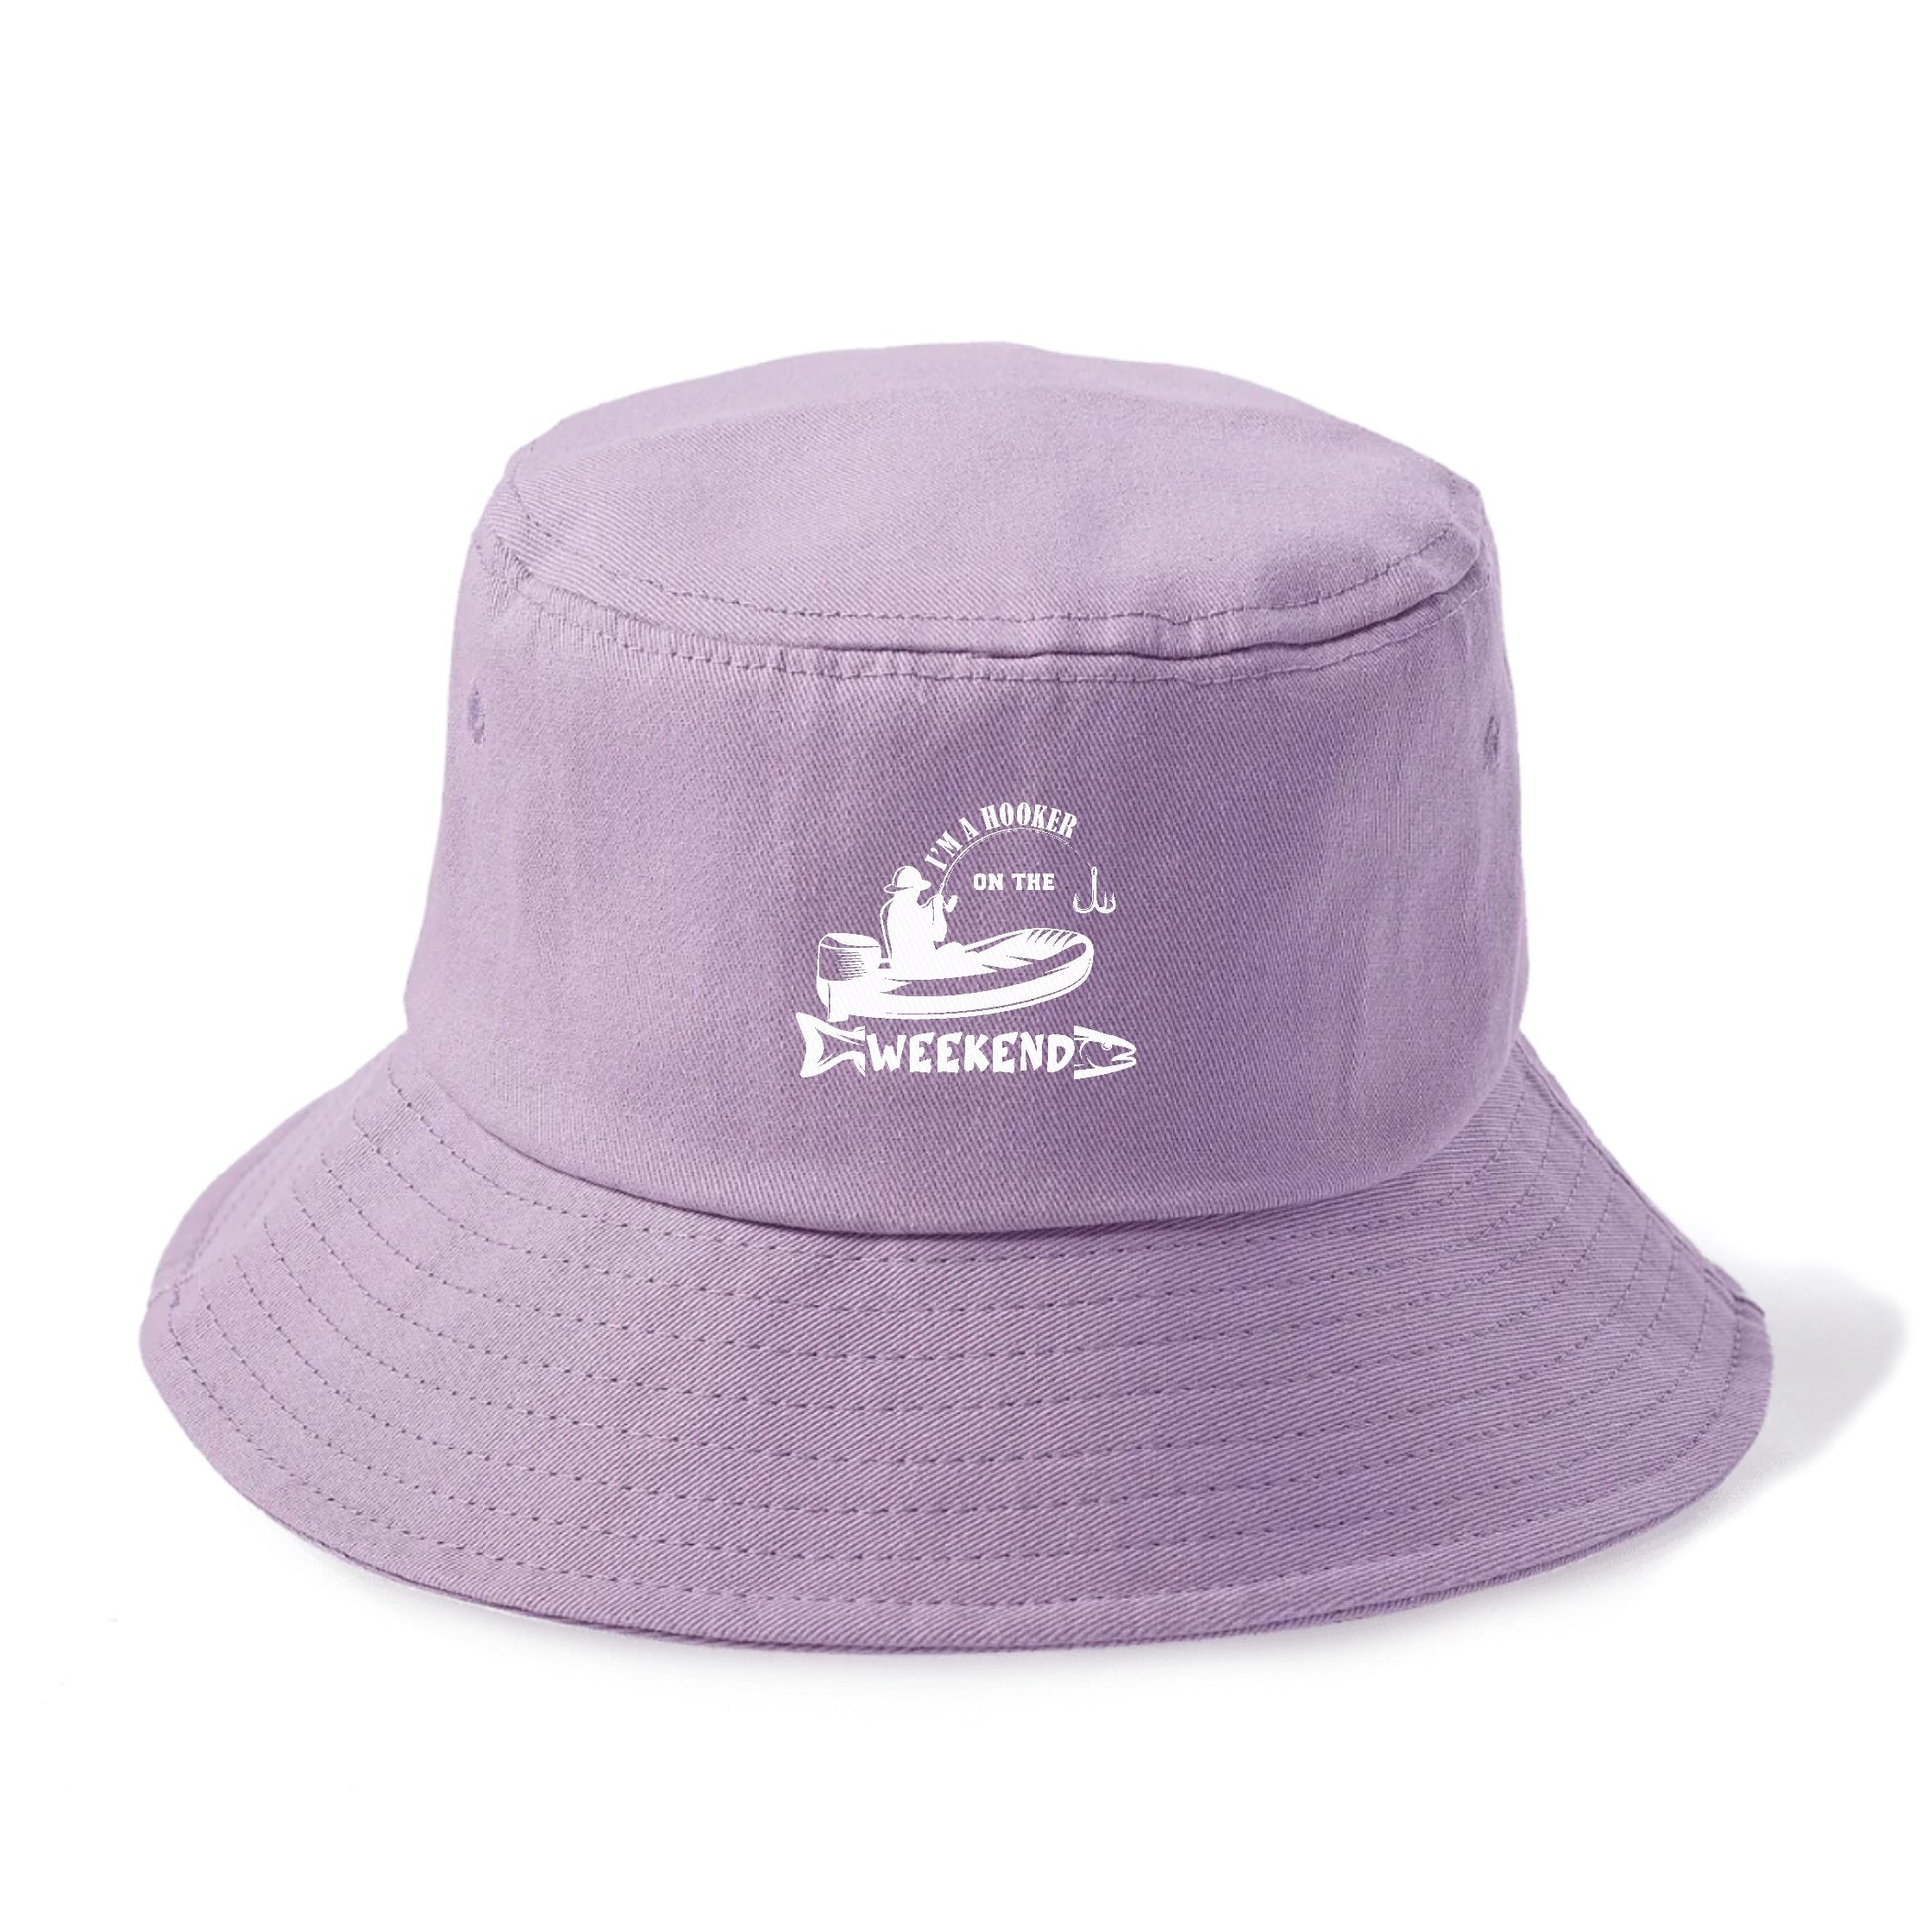 Life Is Better On The Green Let's Go Golfing Bucket Hat – Pandaize